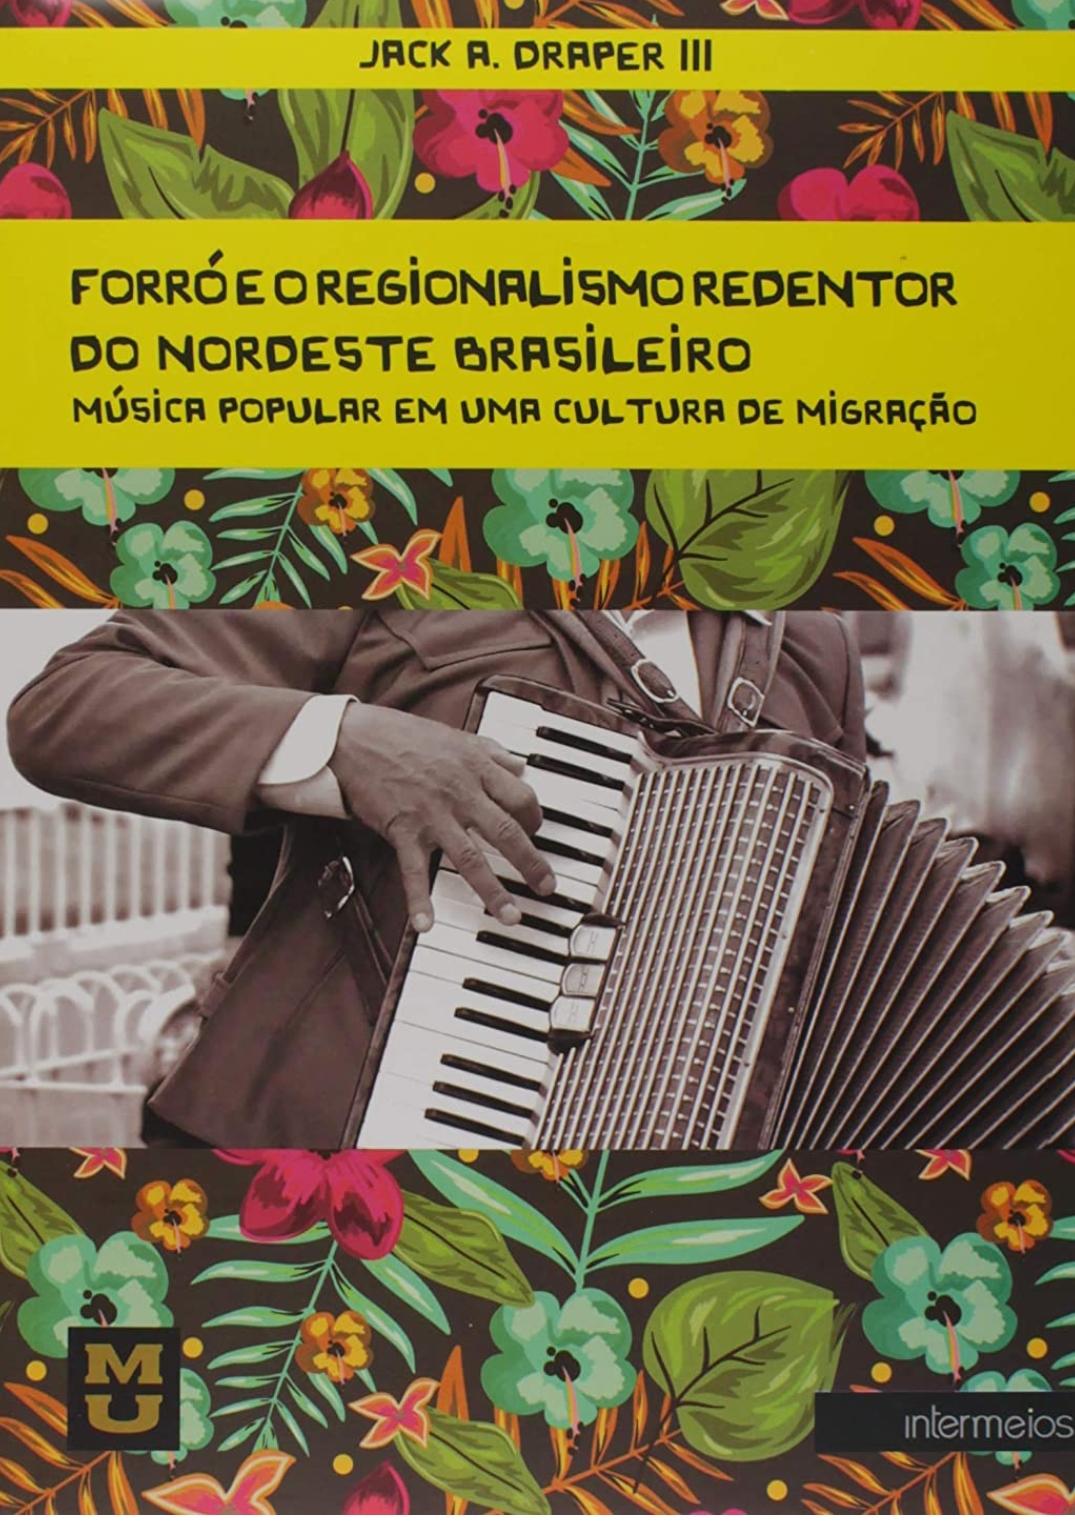 Draper III, J.A. (2010) Forró and Redemptive Regionalism from the Brazilian Northeast: Popular Music in a Culture of Migration. New York: Peter Lang Publishing